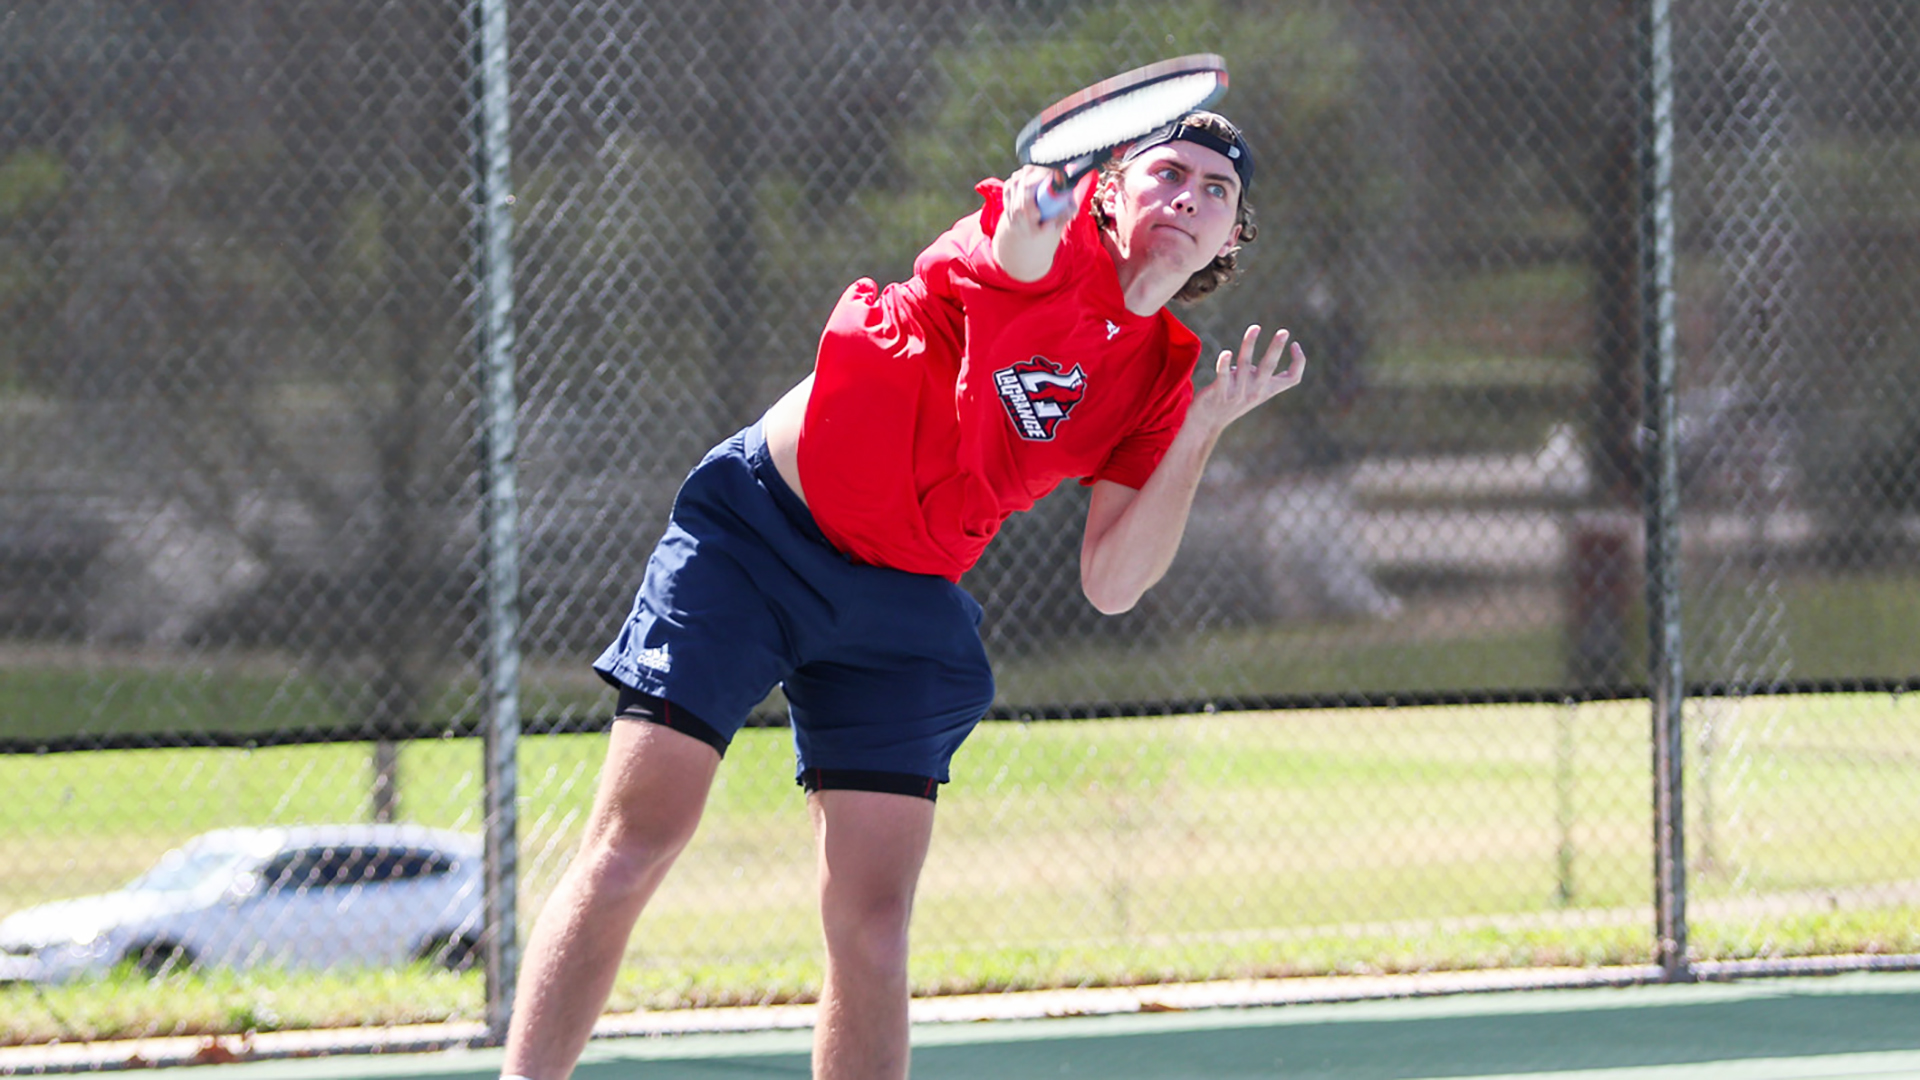 Al Robertson delivered the most competitive matches on the day as LaGrange fell 9-0 to Collegiate Conference of the South (CCS) power Piedmont on Friday, April 14.